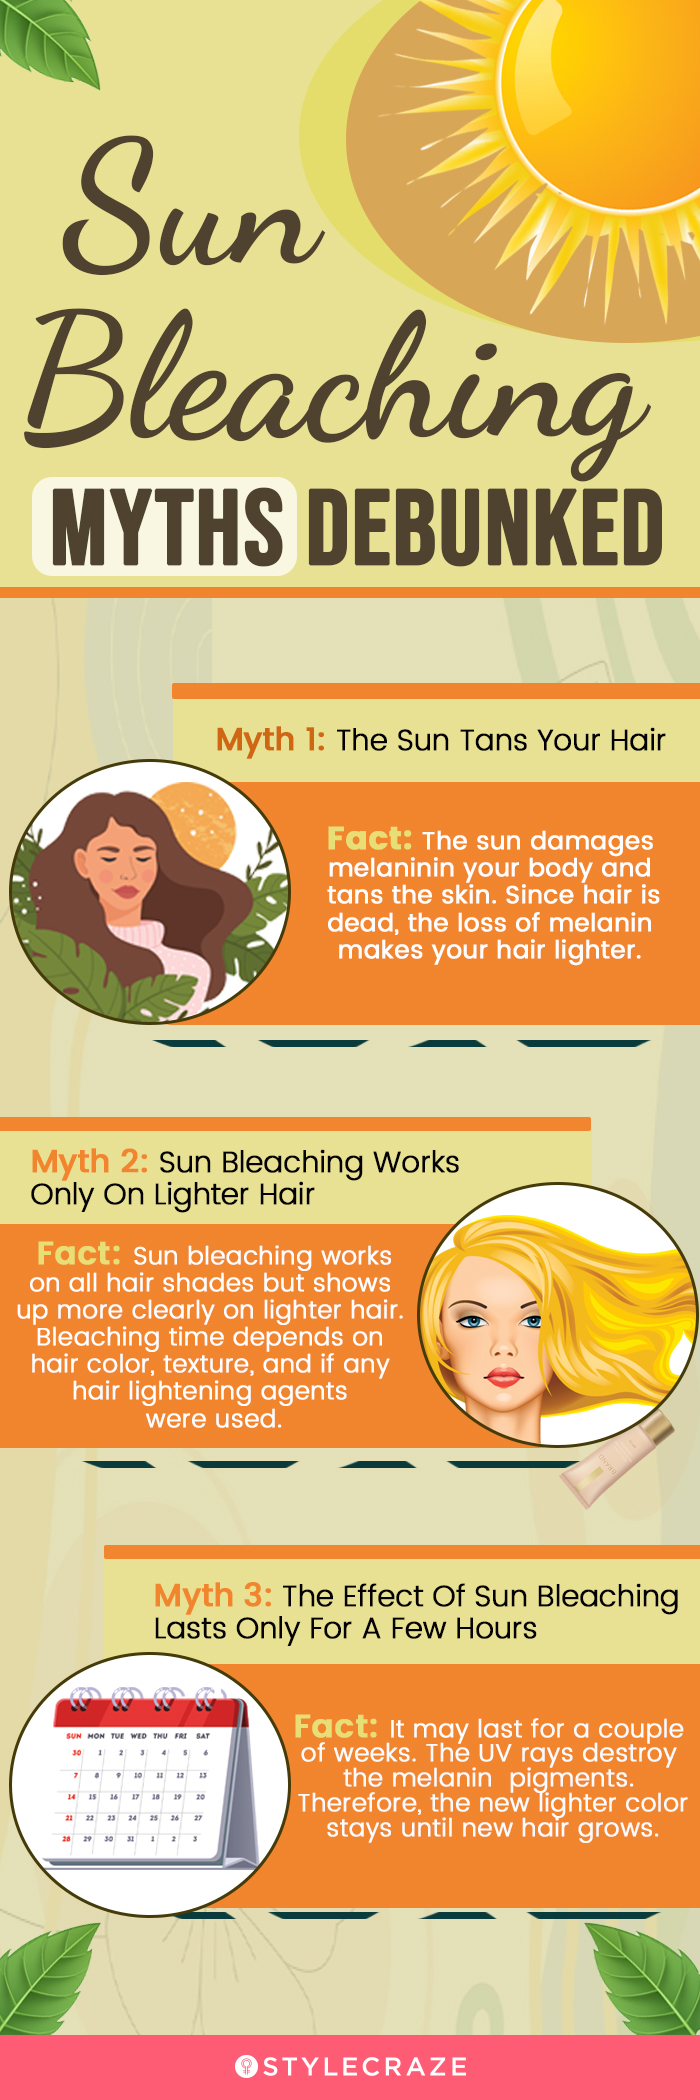 Sun Bleaching Myths Debunked (infographic)